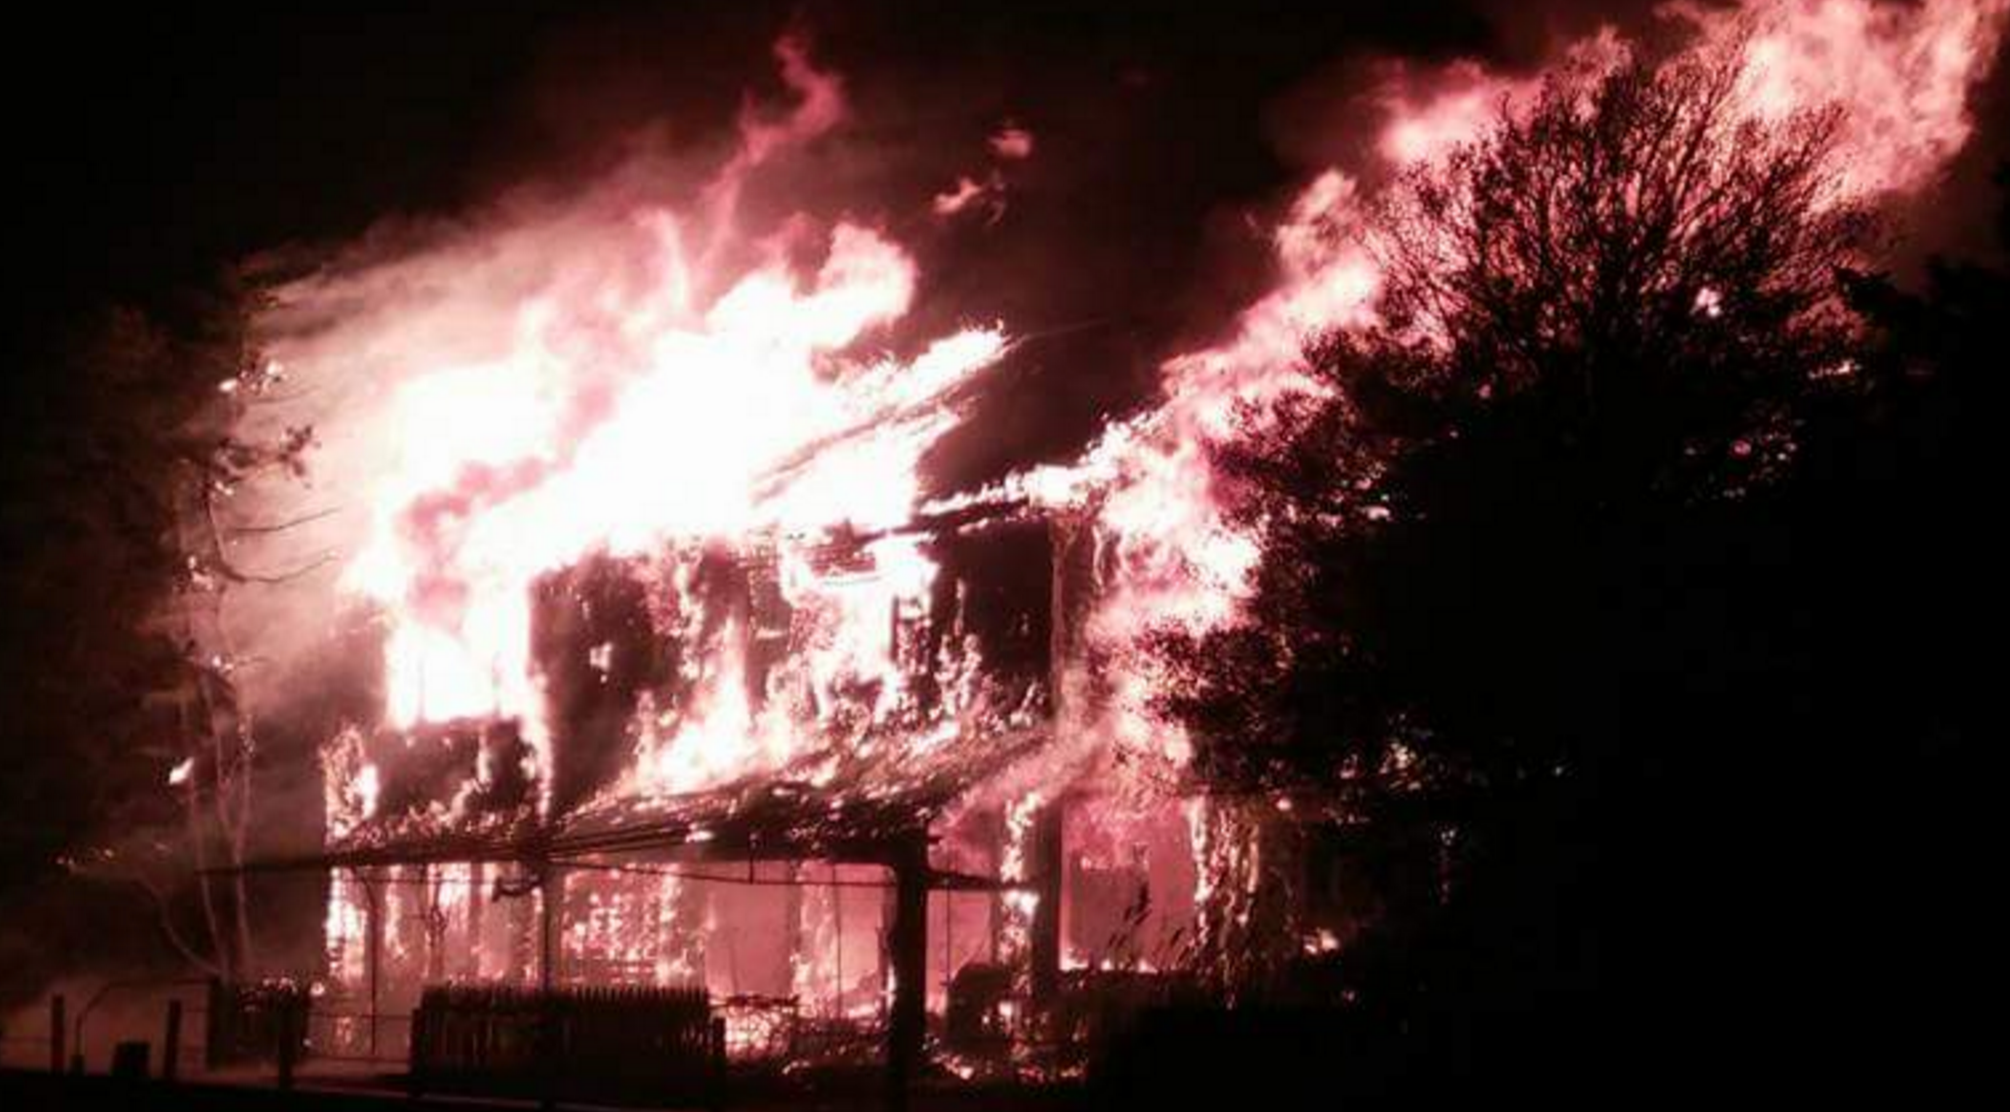 A house engulfed in flames on Channel Lane in Mantoloking Saturday evening. (Photo: Bruce Roland via @wt2fd via Twitter)